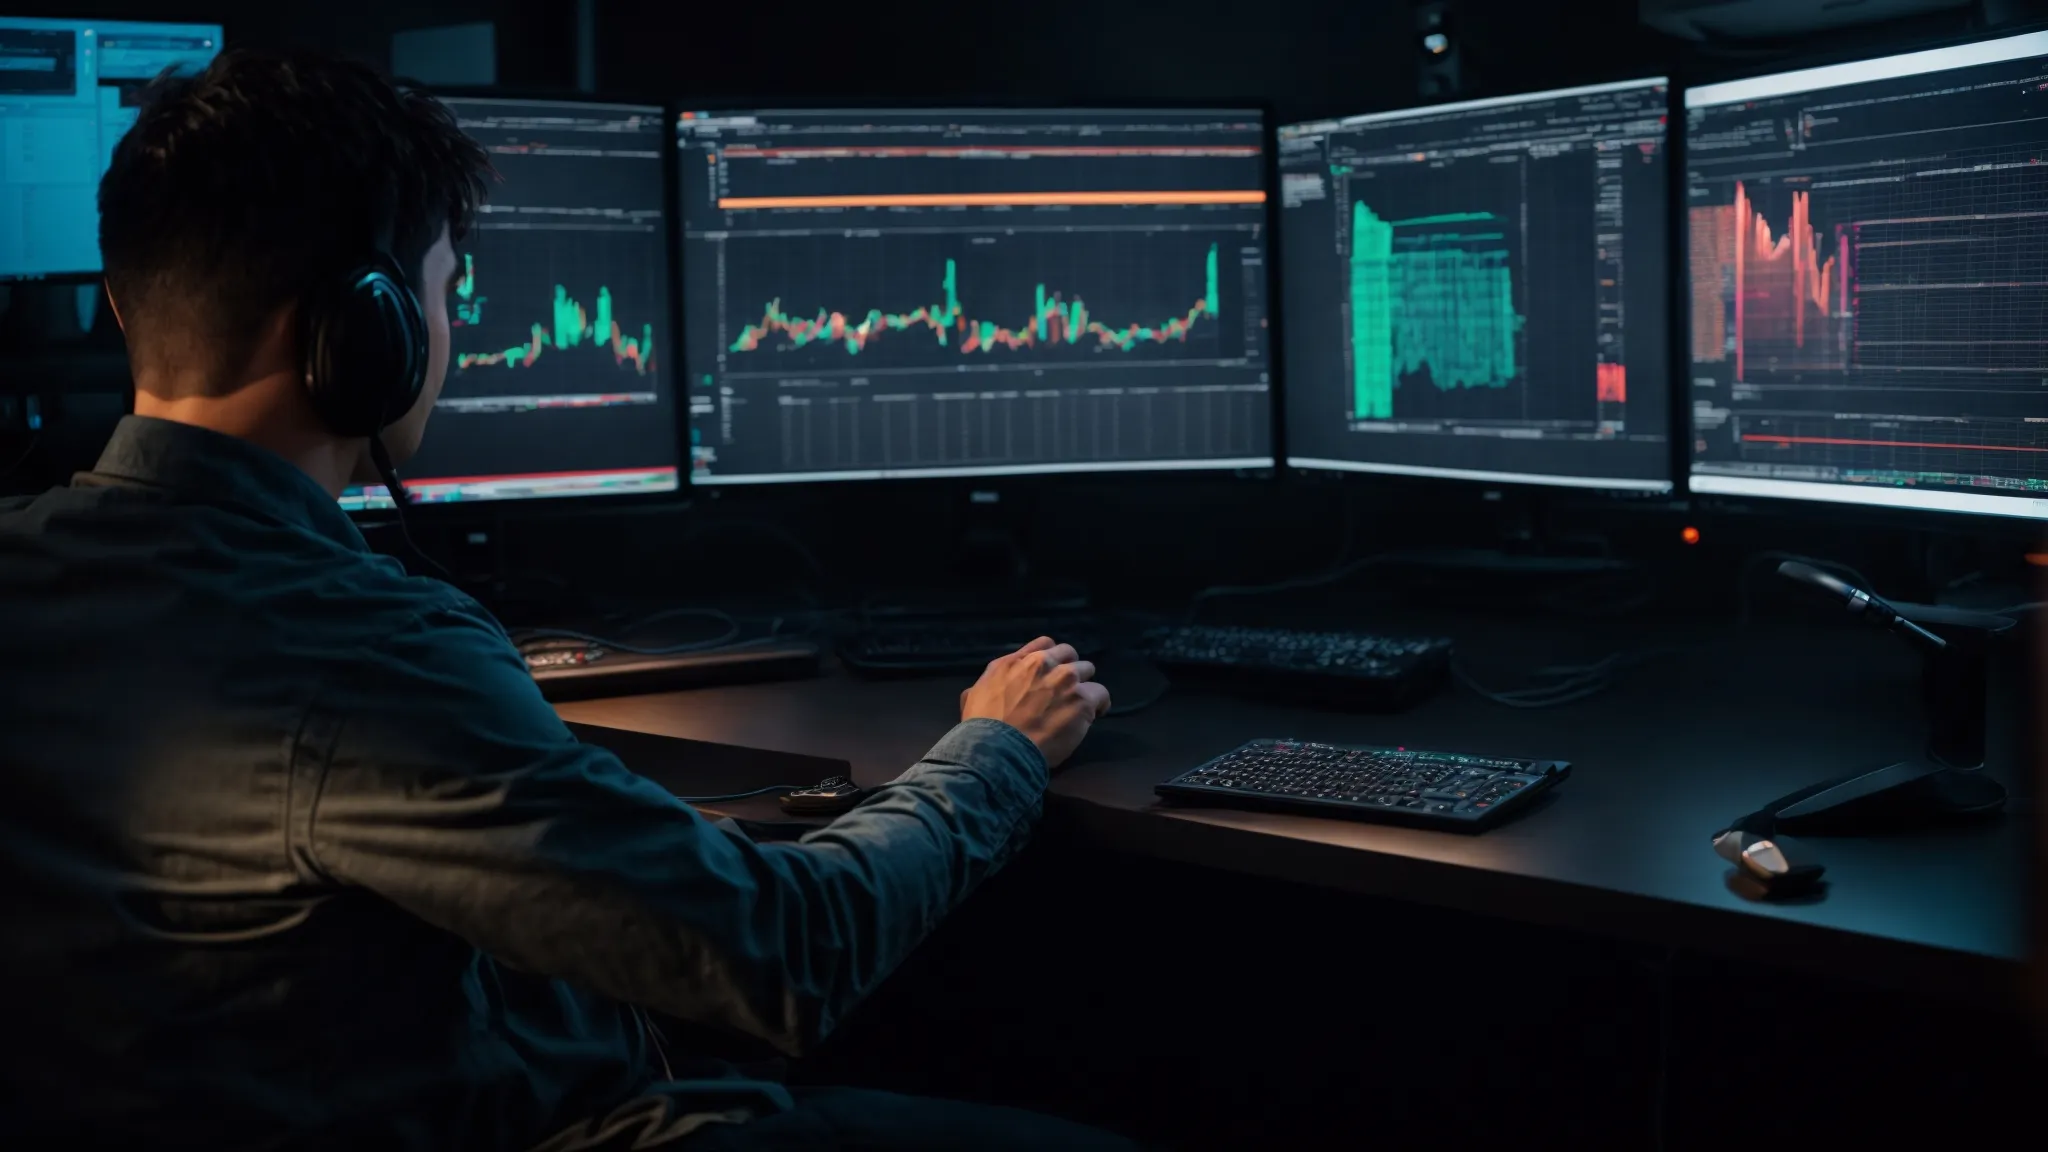 a person sits before a dual computer monitor setup, analyzing colorful graphs and keyword trends for market research.